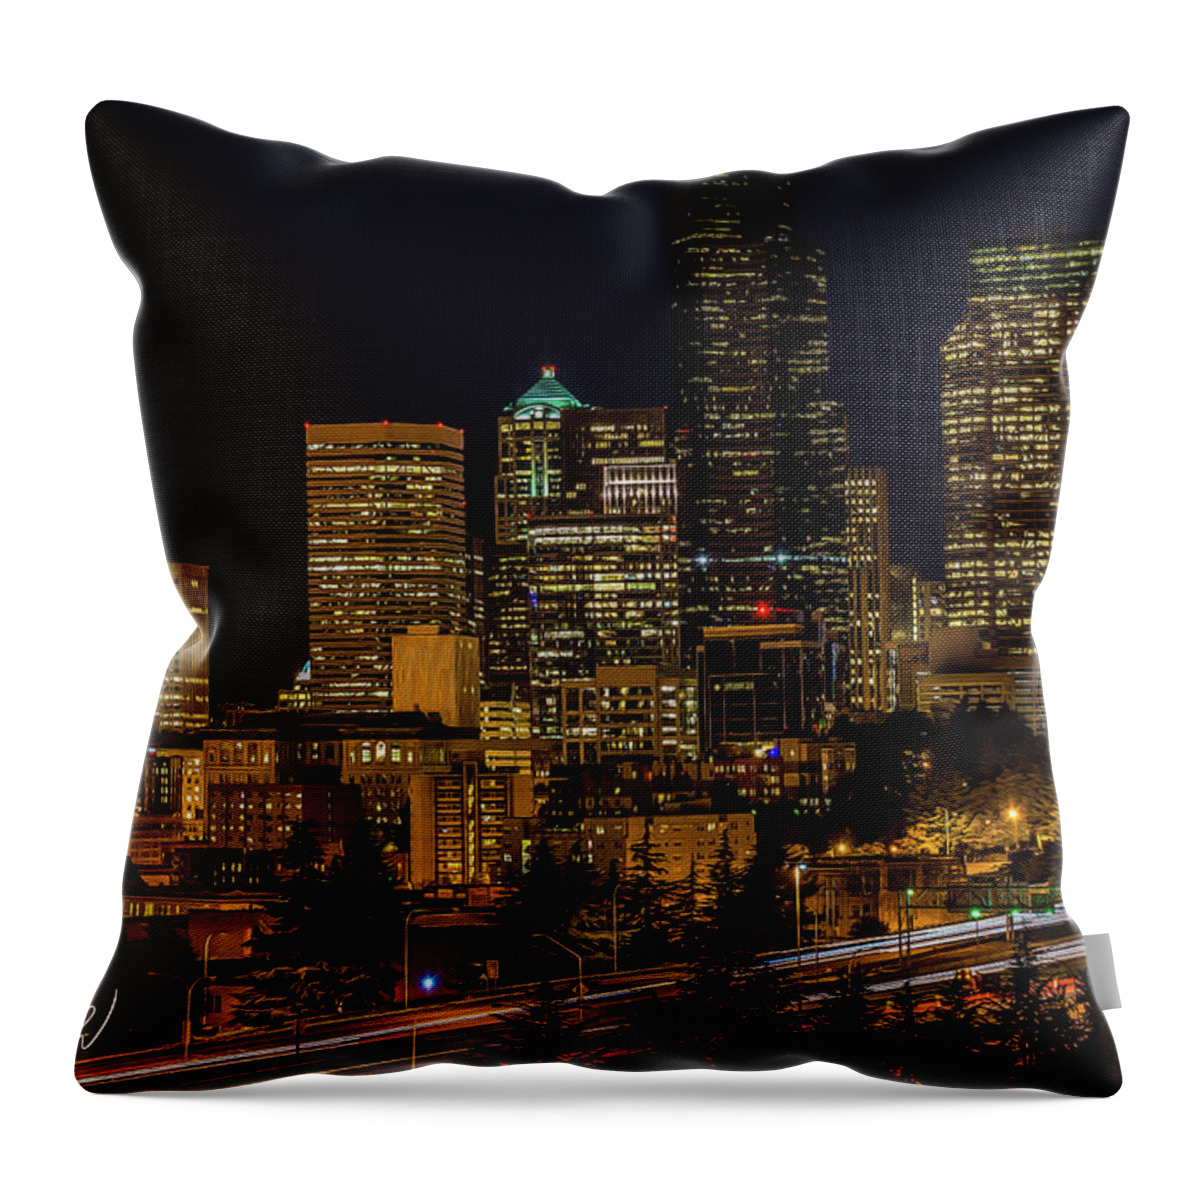 Seattle Throw Pillow featuring the photograph Seattle Night Skyline by Mark Joseph